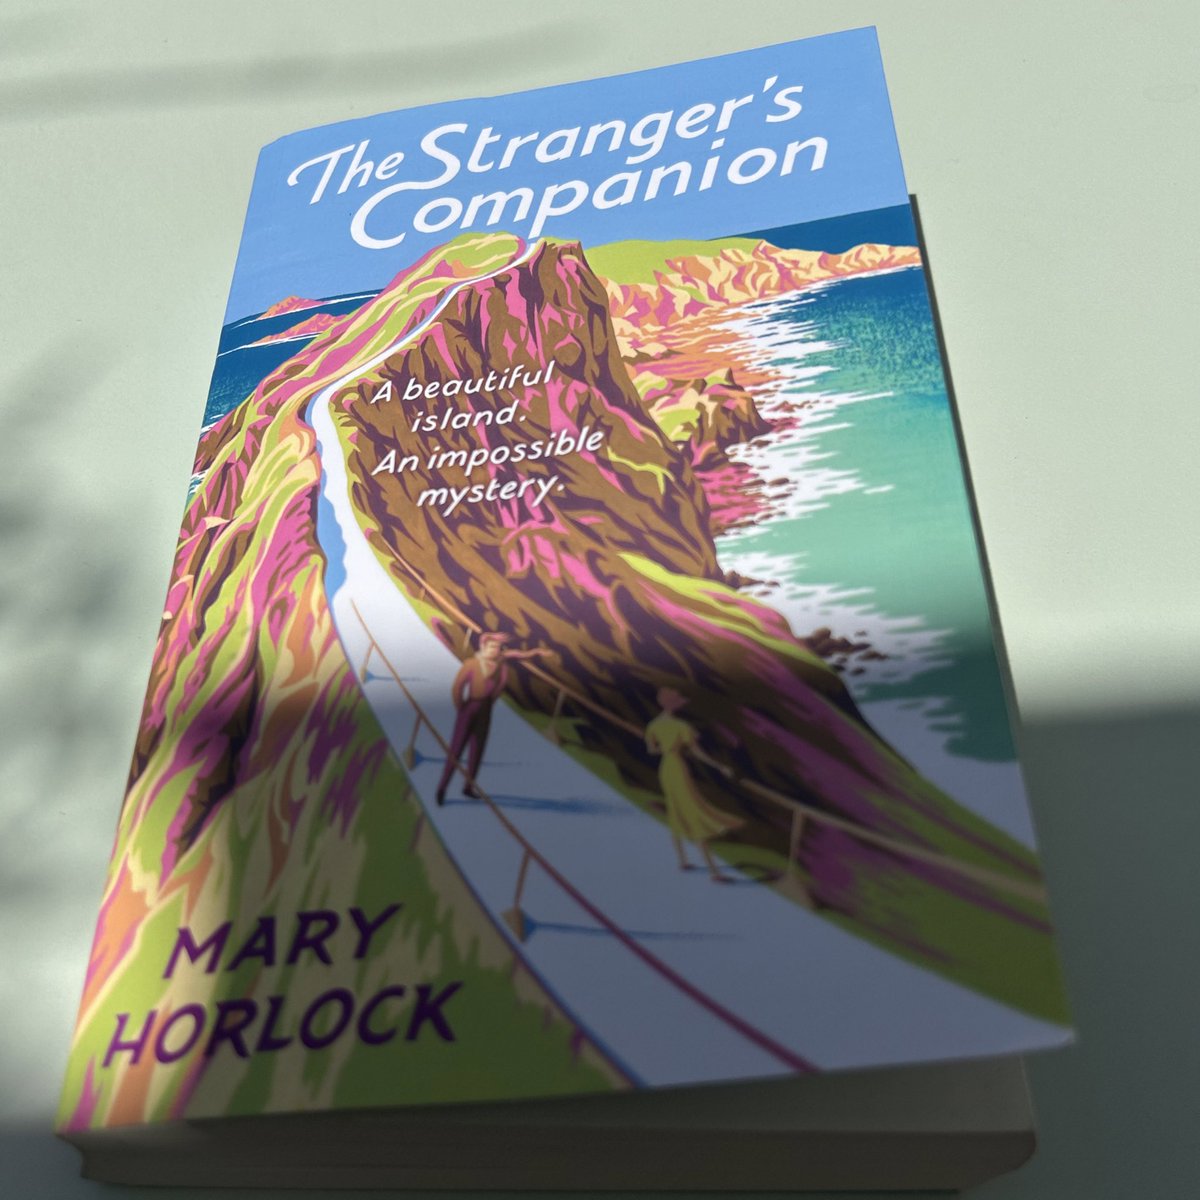 I’ve just finished The Stranger’s Companion – an intriguing novel with wonderful characterisation and a rich, distinctive narrative voice. It reminded me of The Trouble with Goats and Sheep – at once a mystery, a coming of age story and the tale of a small community. Out in June!